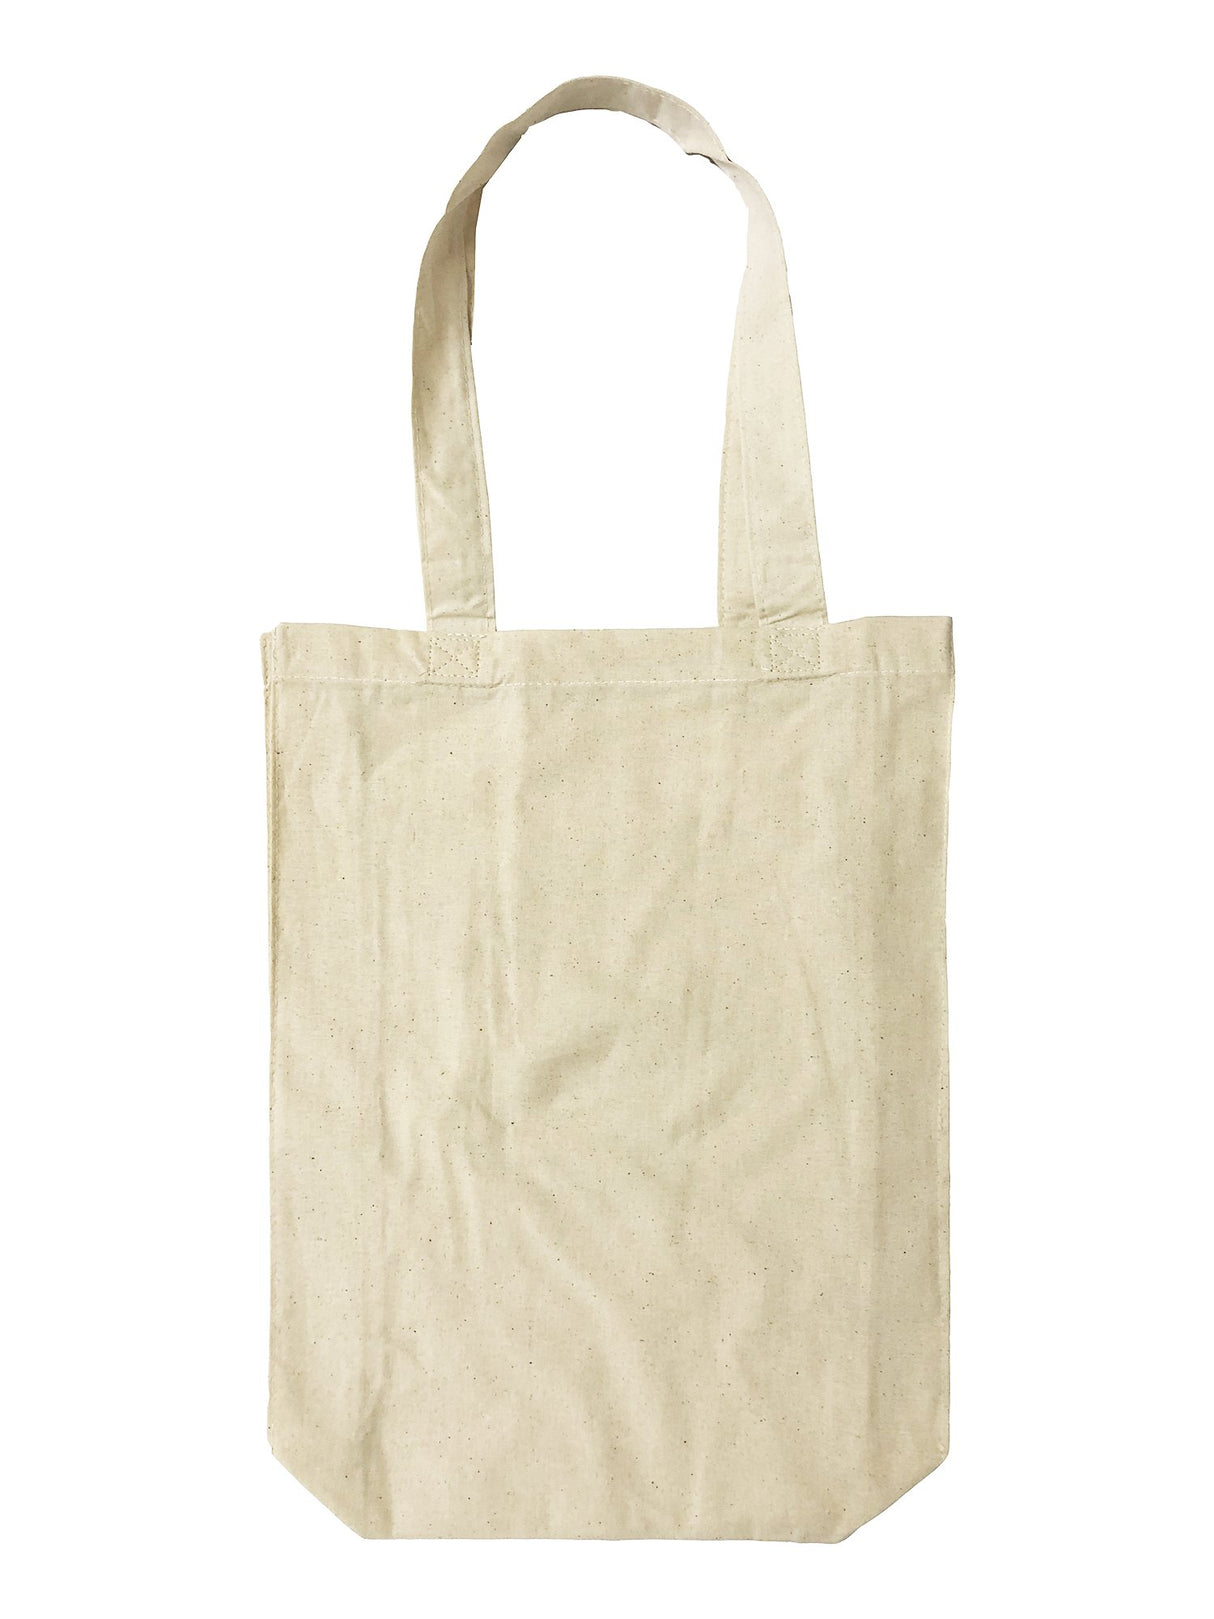 12 ct Cotton Book Bags with Full Gusset / Small Tote Bag - By Dozen